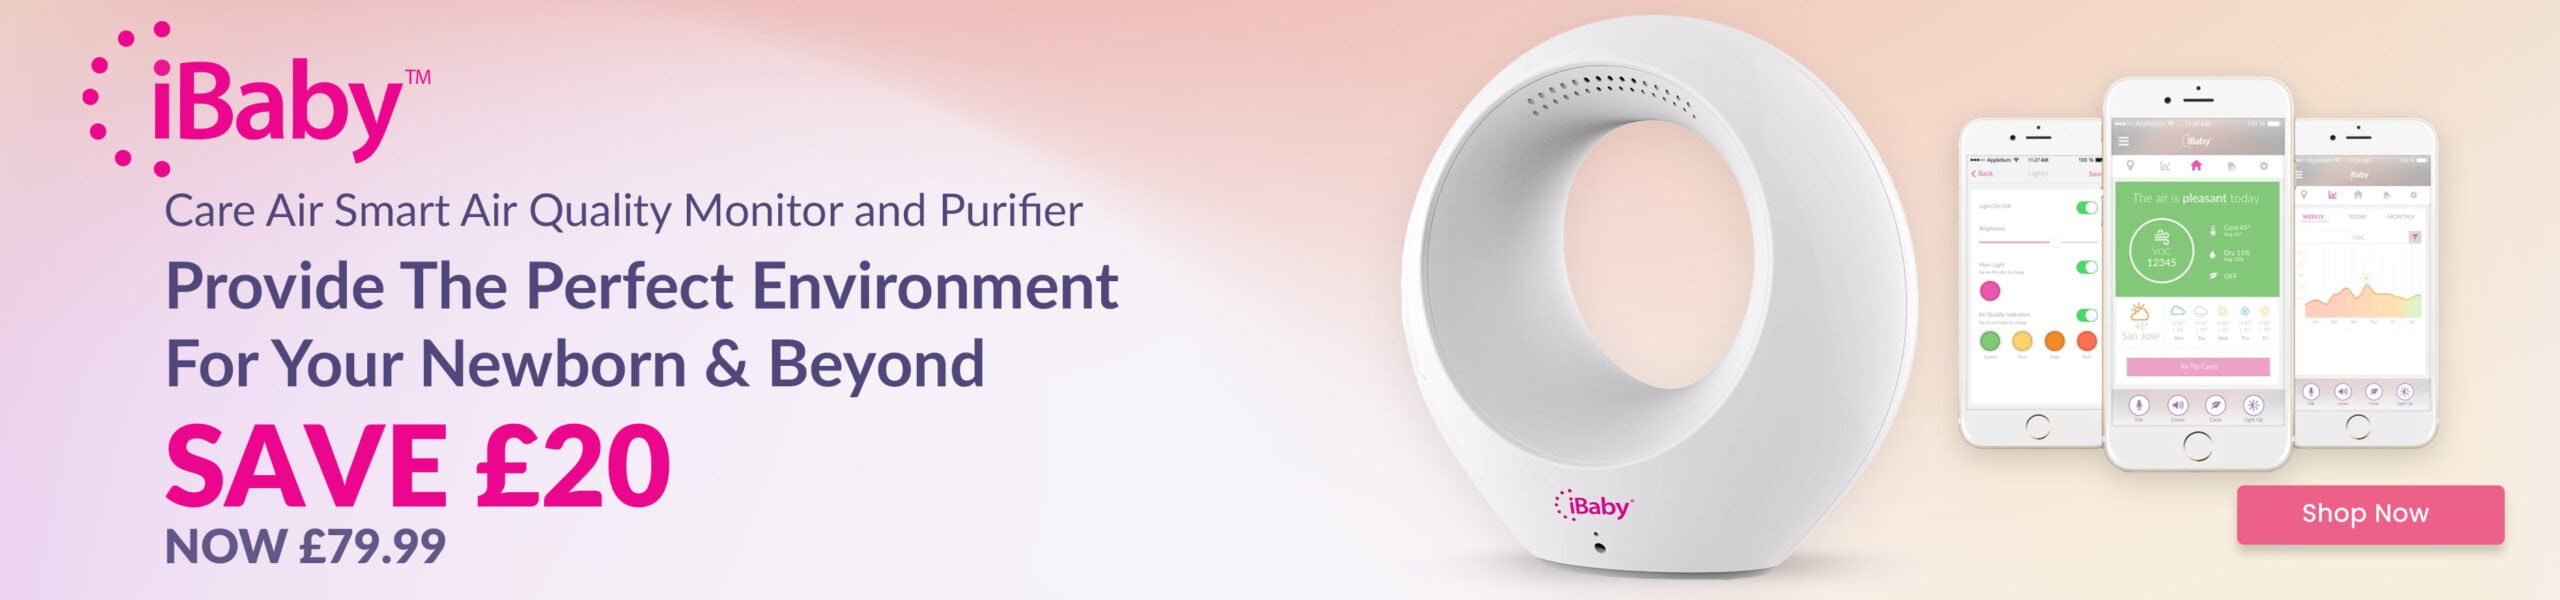 iBaby care air Smart